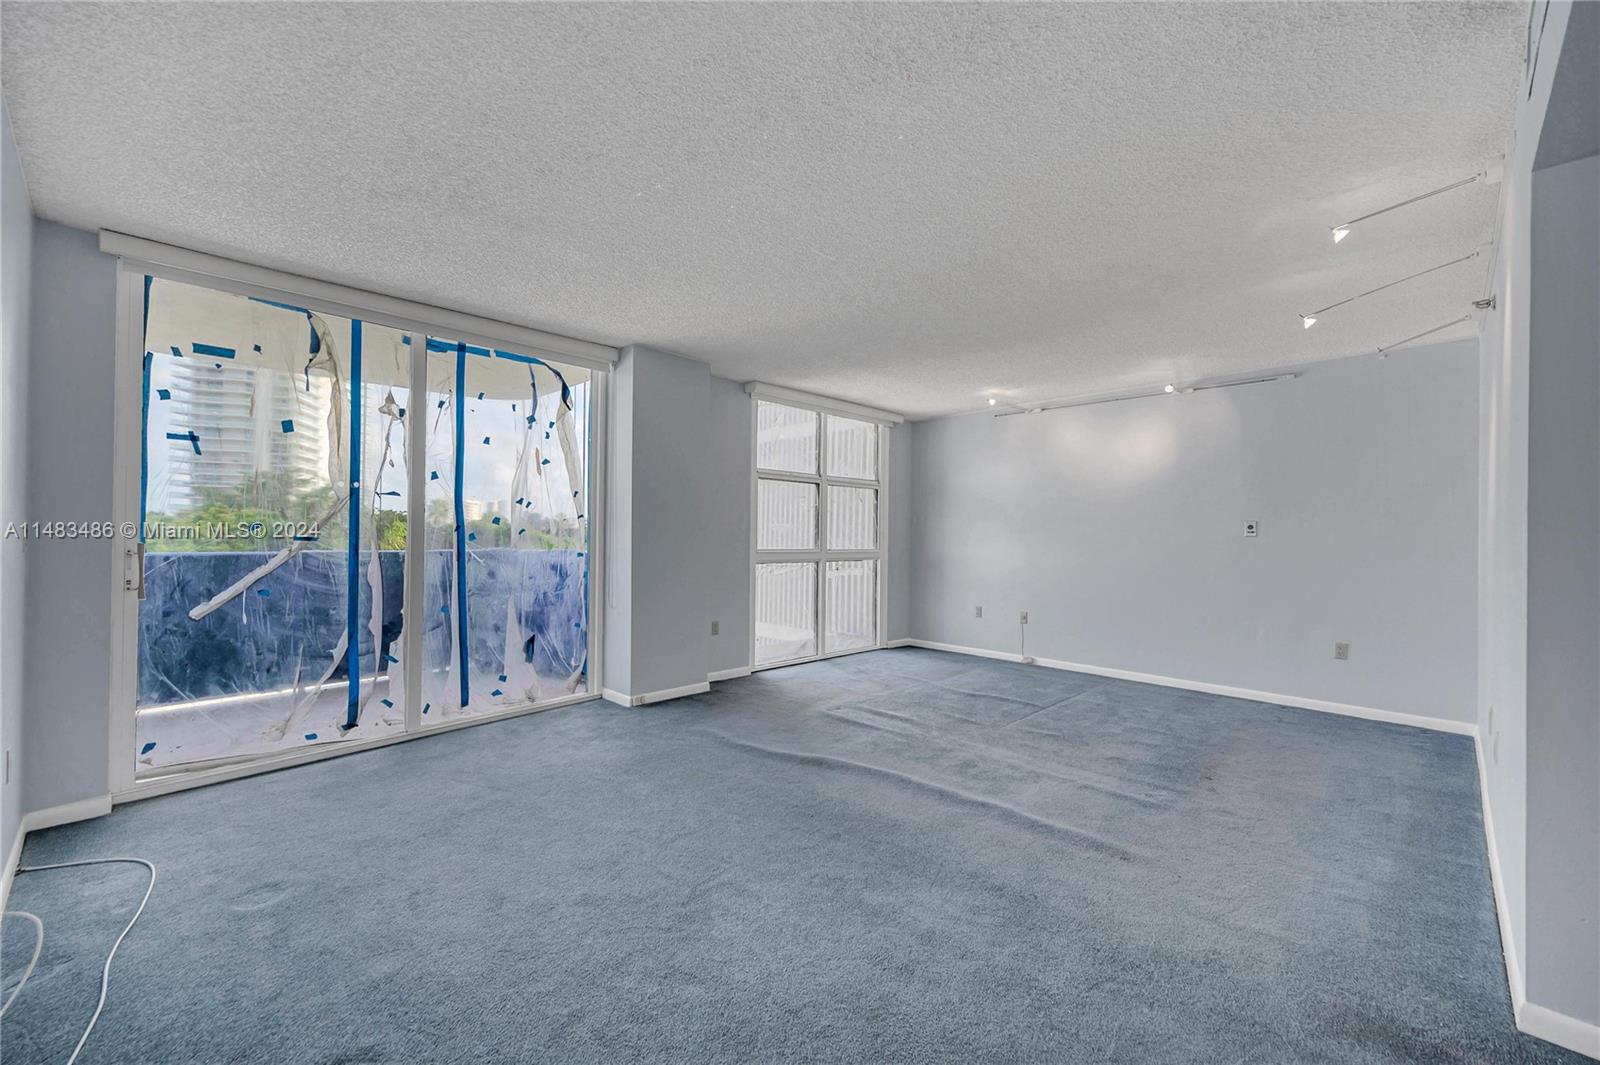 9 Island Ave Unit 414, Miami Beach, Florida, 33139, United States, 3 Bedrooms Bedrooms, ,3 BathroomsBathrooms,Residential,For Sale,9 Island Ave Unit 414,1397621